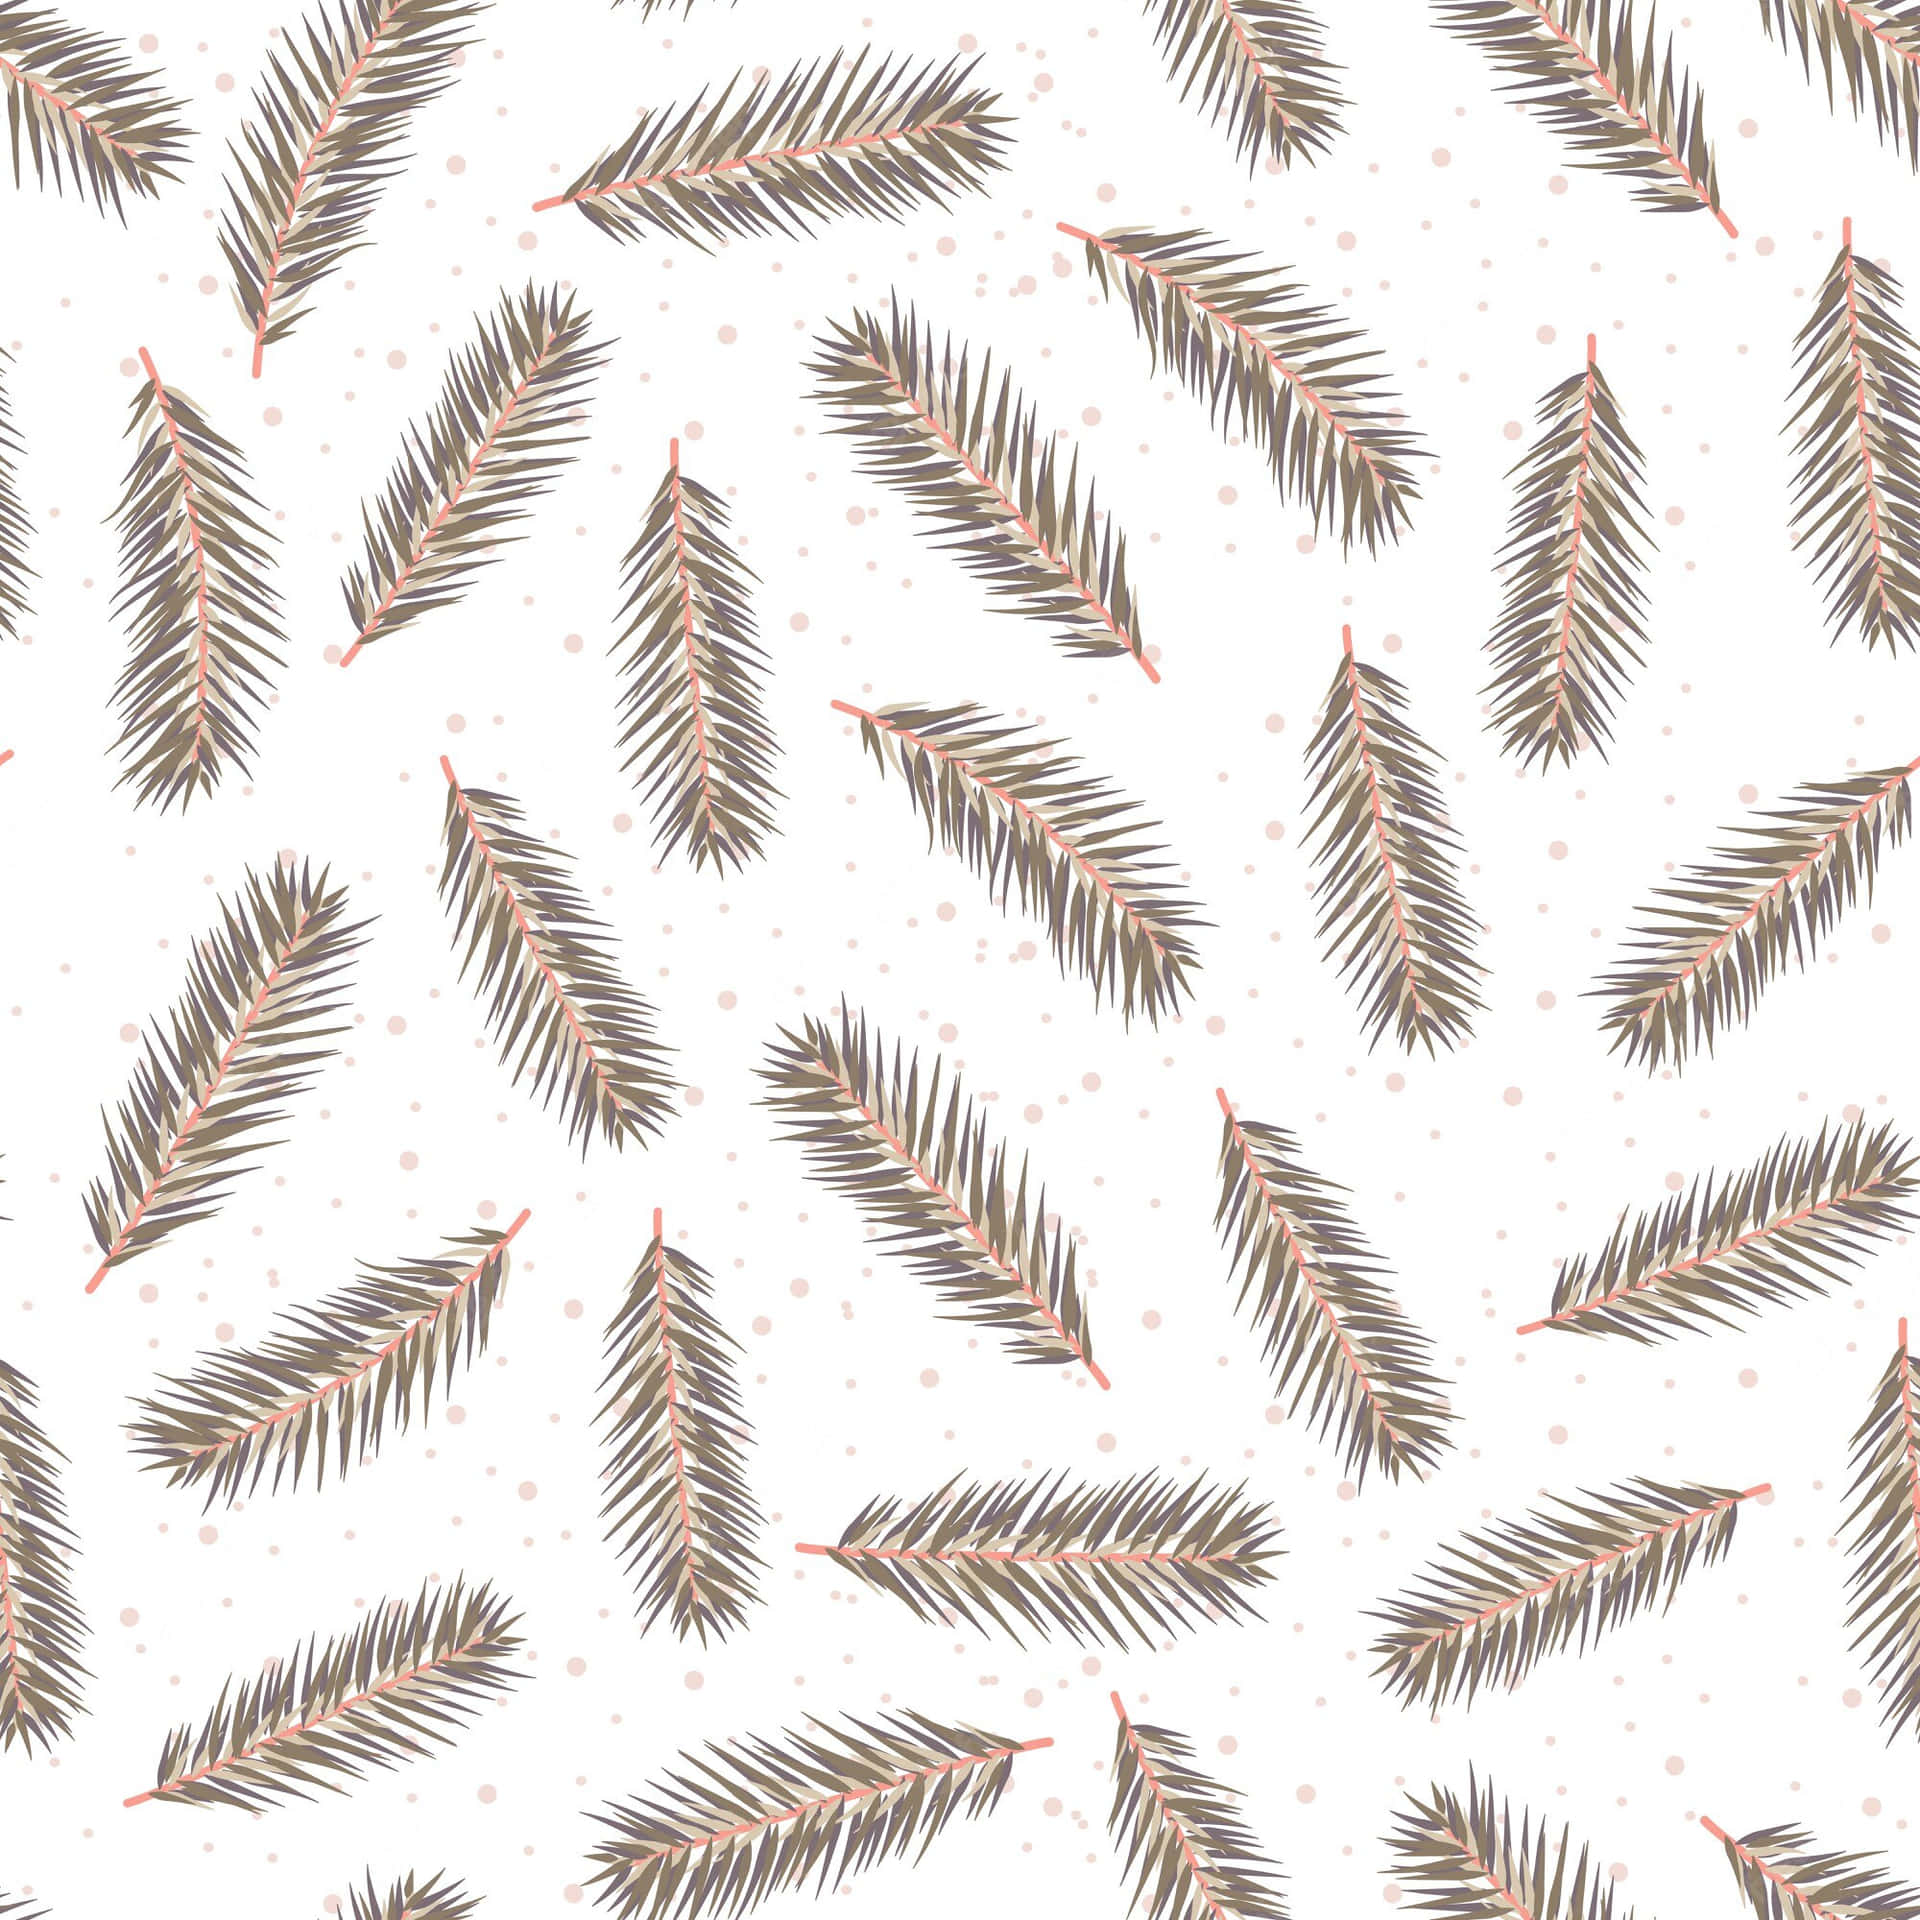 A Seamless Pattern Of Pine Branches Wallpaper